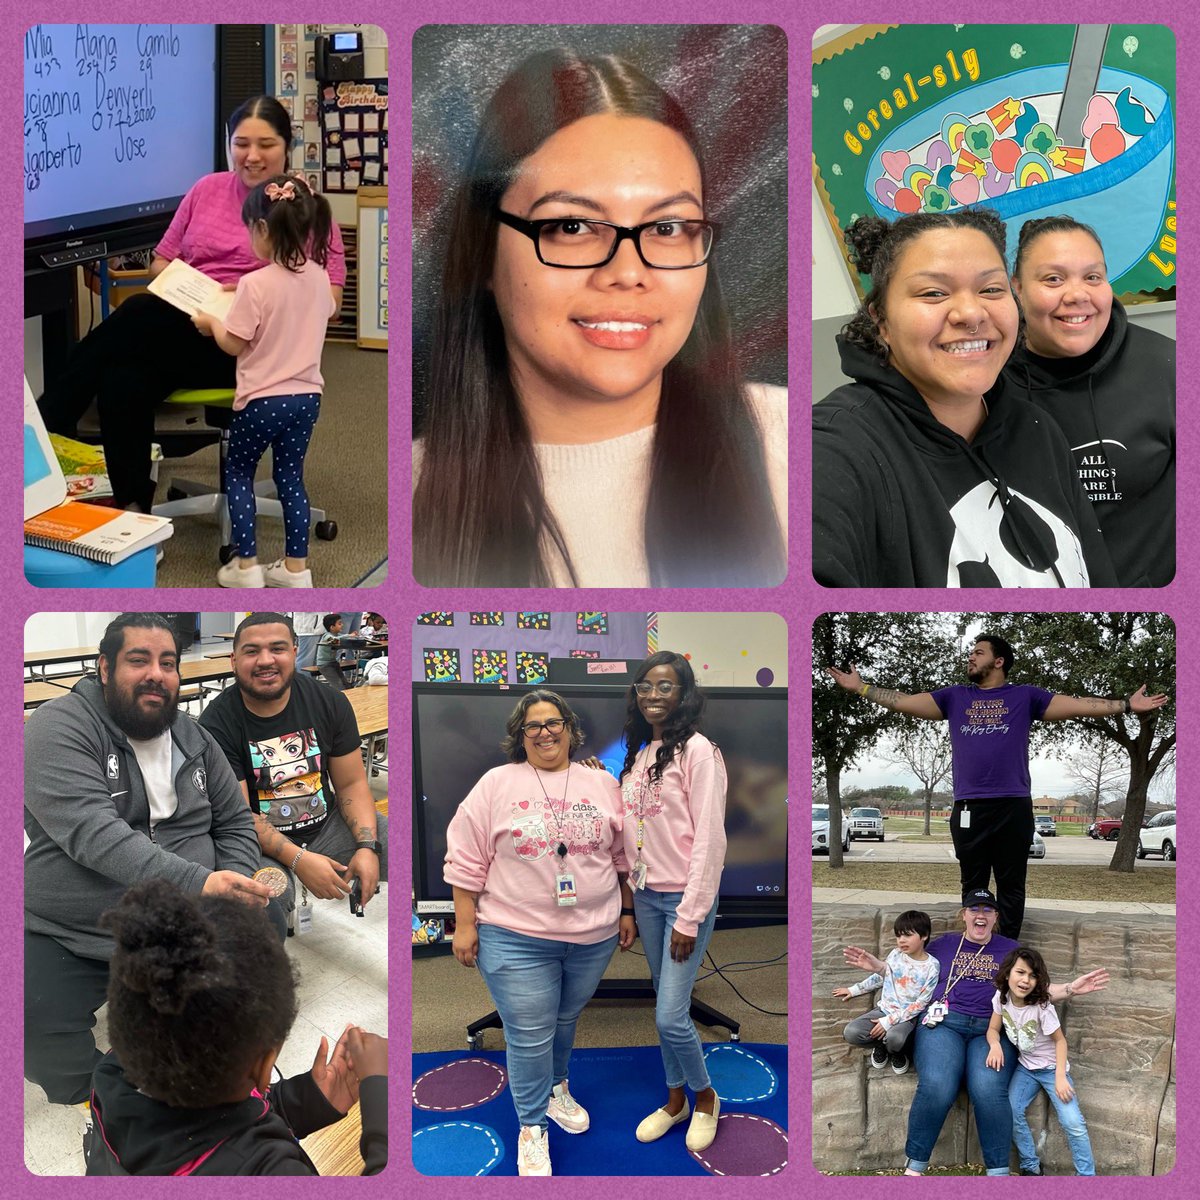 Thank you to all our amazing Trailblazer paraprofessionals! We appreciate your hard work and dedication. Your impact is truly immeasurable! 💜💛 #lovemckamy @CFBISD @mpruitt1 @jwrightlssp @msklarer @SandyMeyerCFB #ParaprofessionalDay